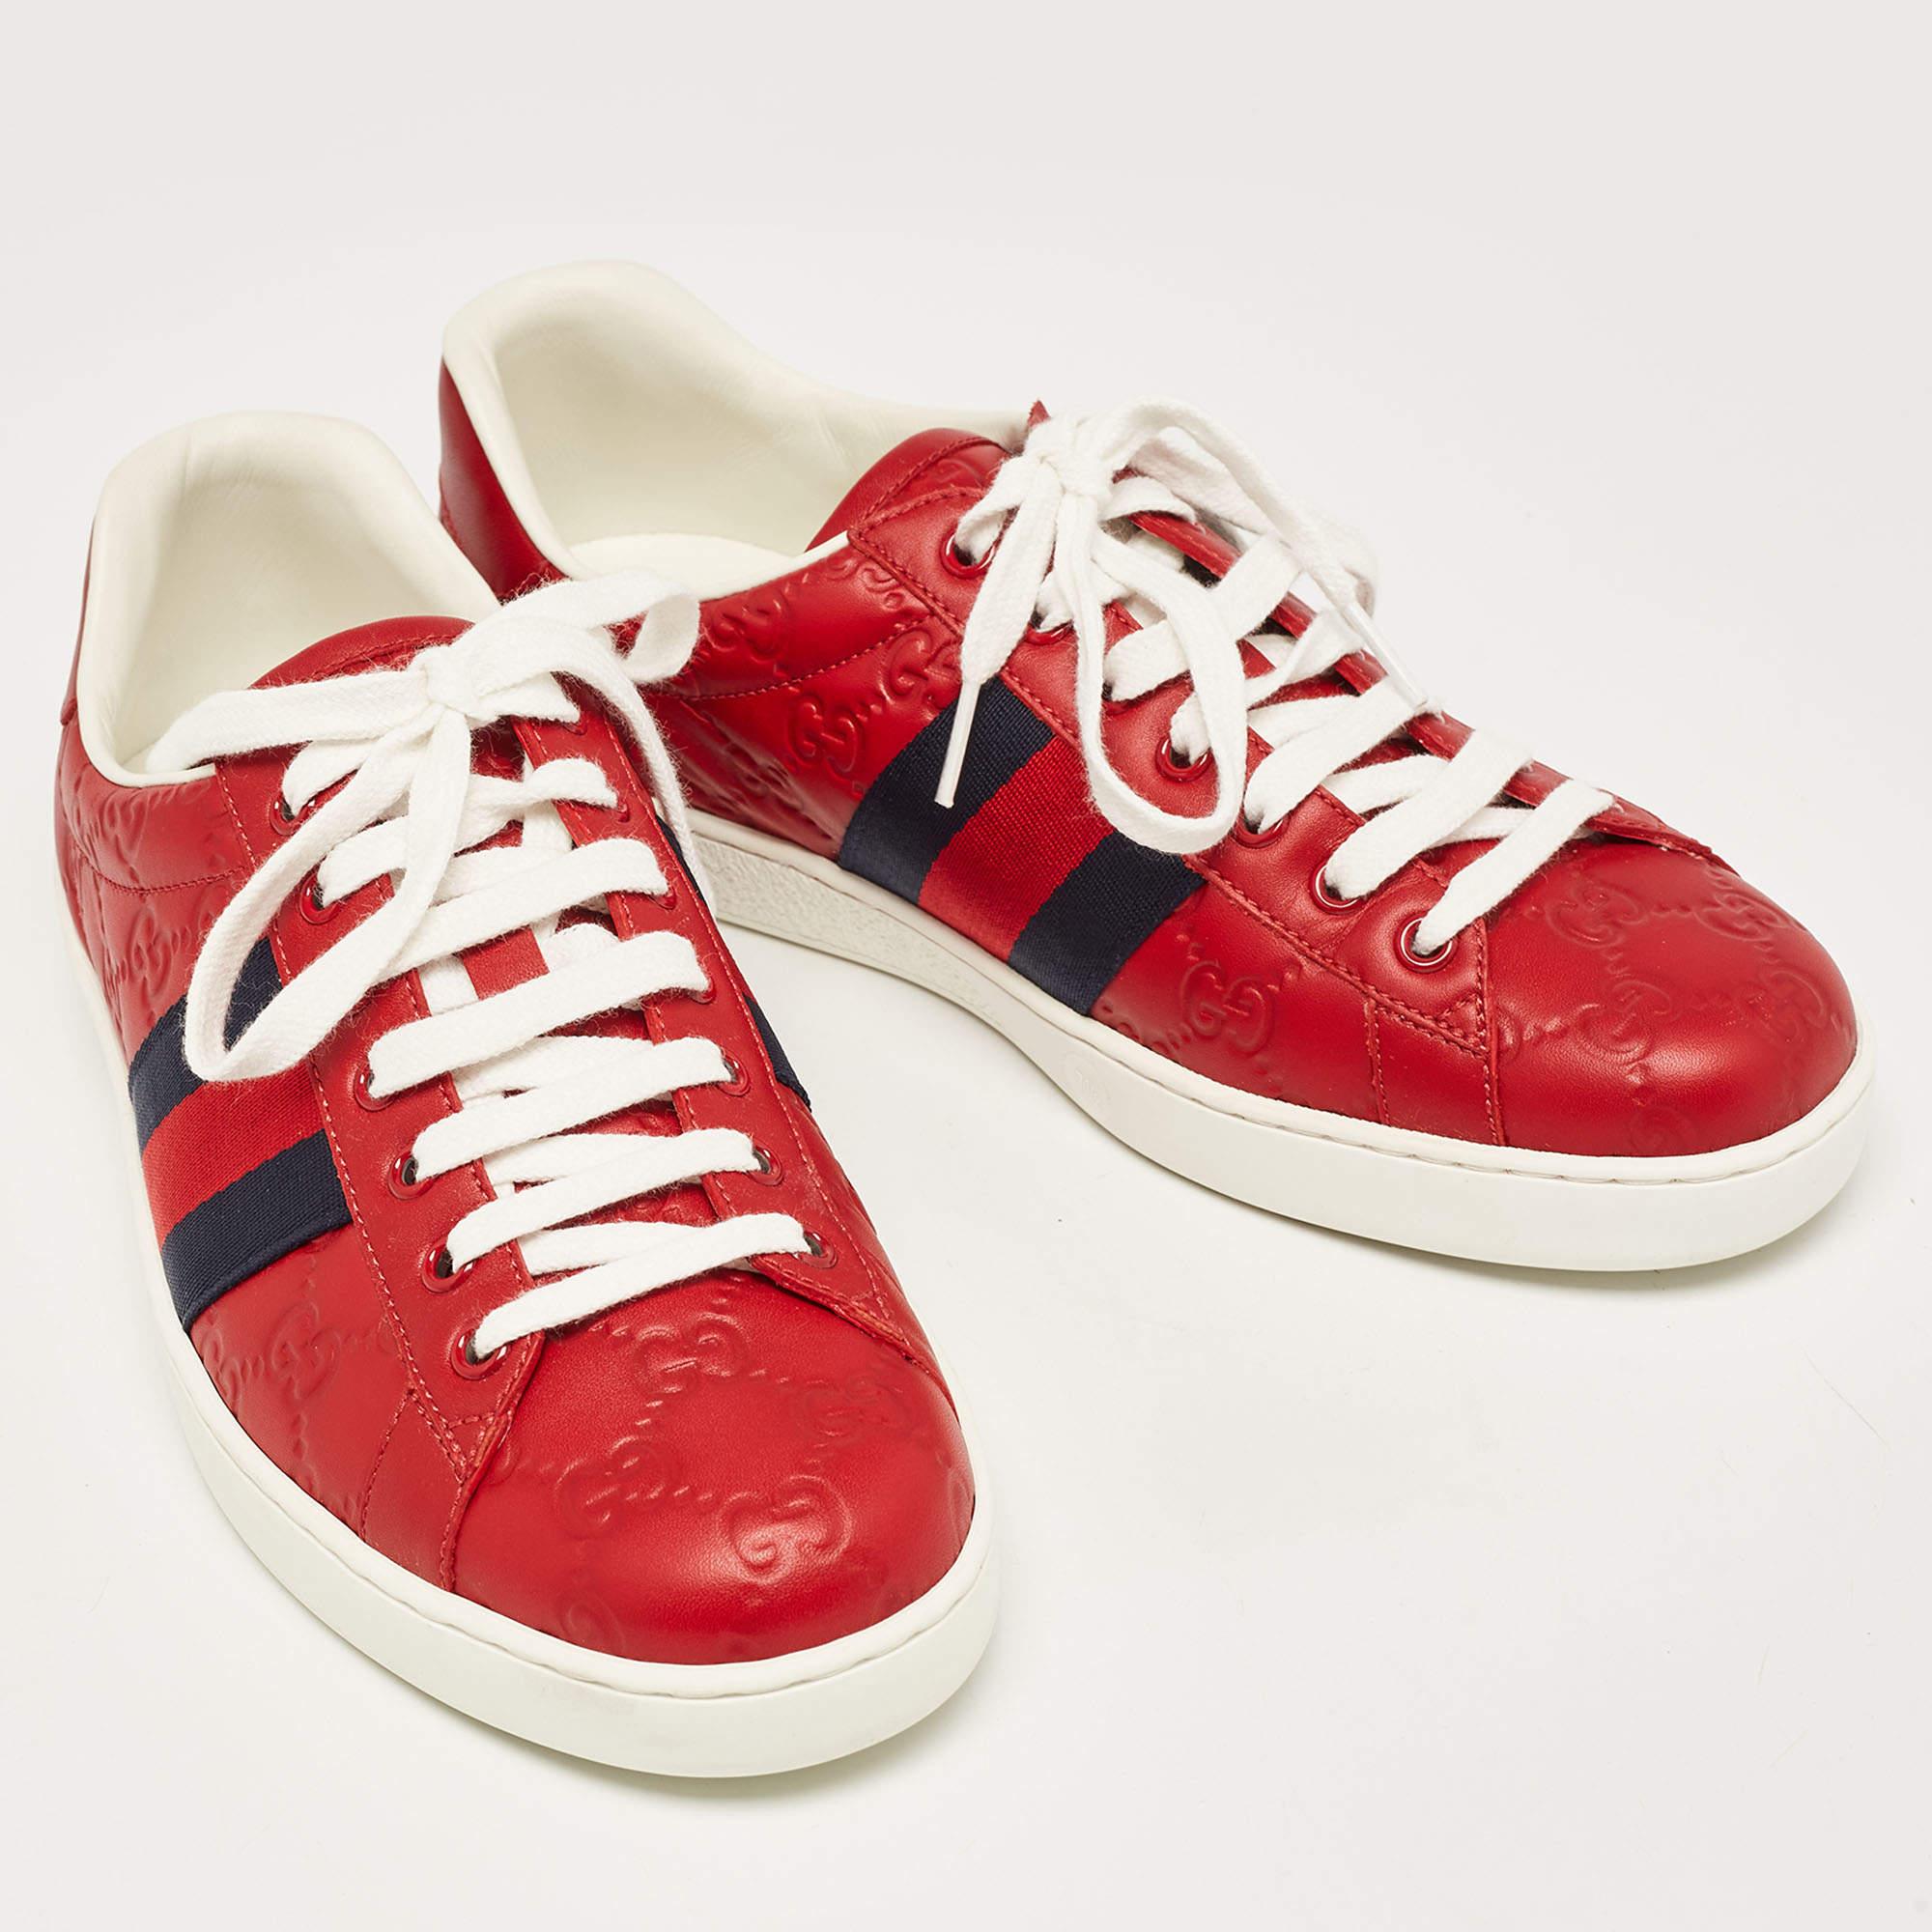 Infused with signature elements, these Gucci sneakers will make your days comfortable. They are constructed from Guccissima leather and are added with a Web stripe detailing on the sides. With lace-up vamps and rubber soles, this pair aims to